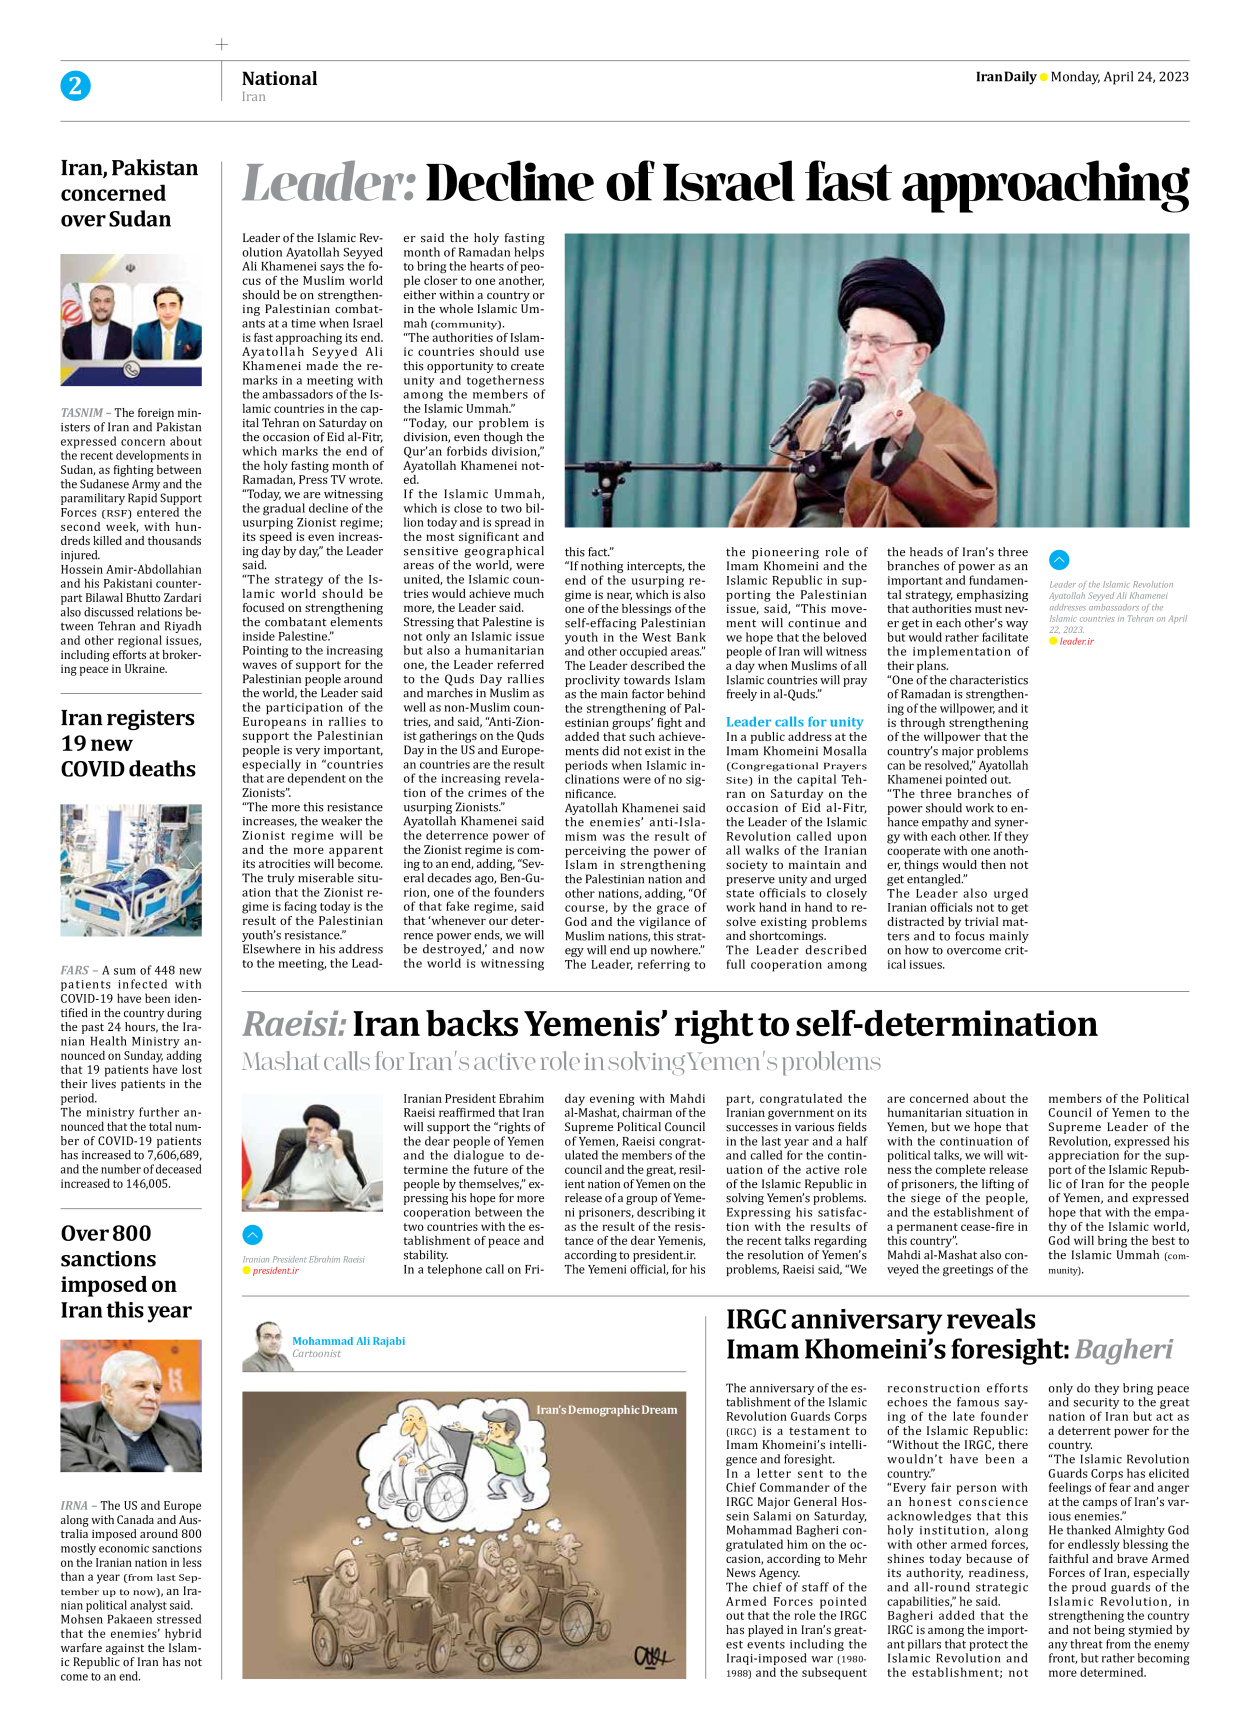 Iran Daily - Number Seven Thousand Two Hundred and Seventy Four - 24 April 2023 - Page 2